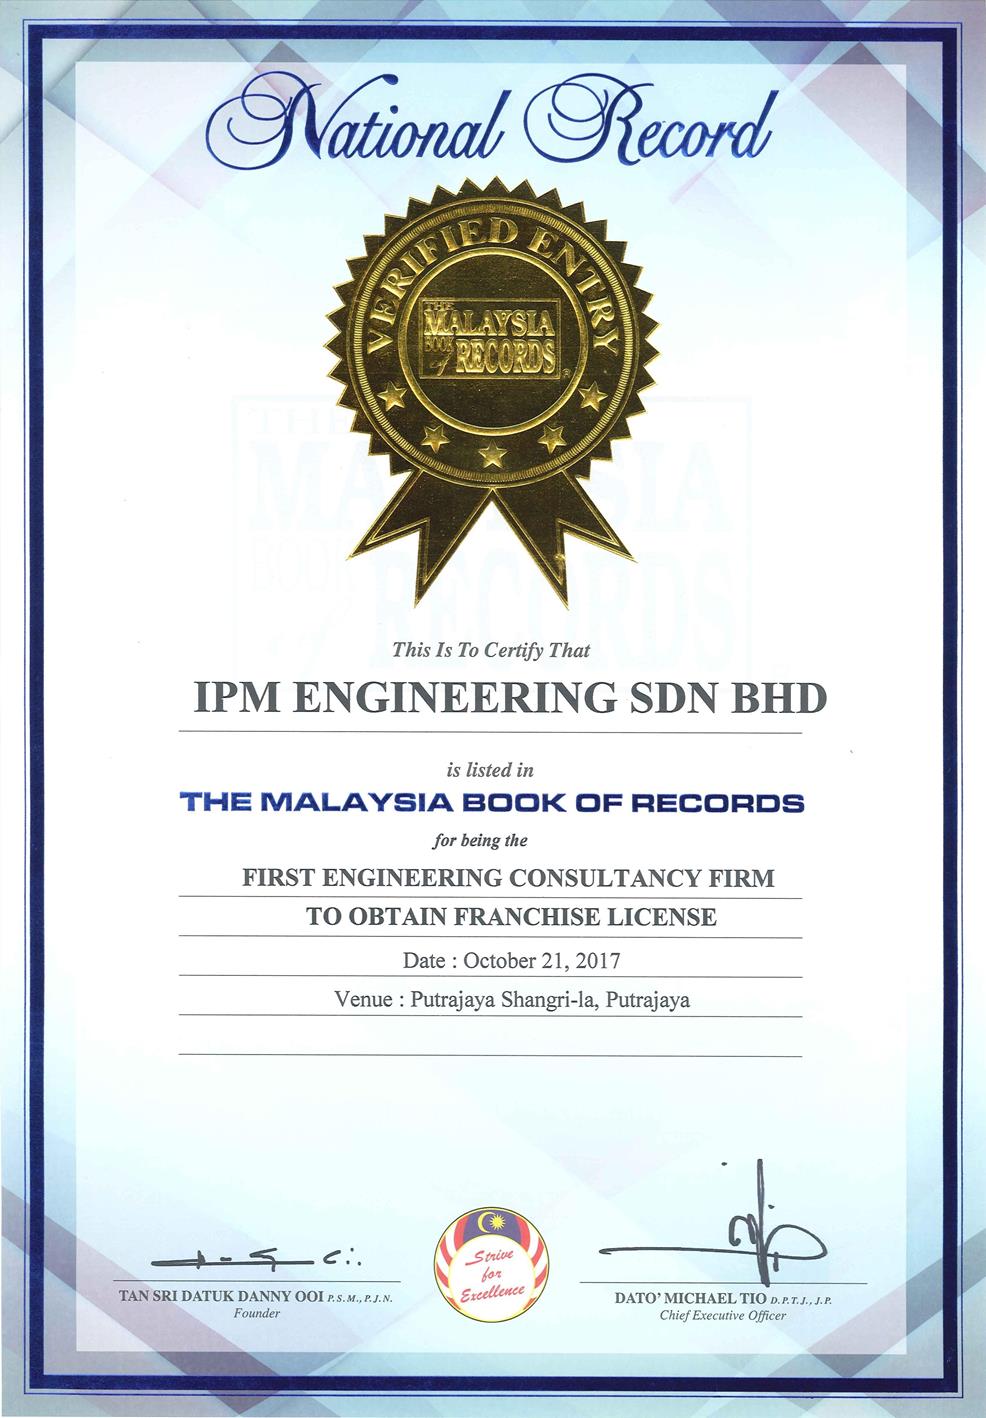 IPM The Malaysia Book of Records